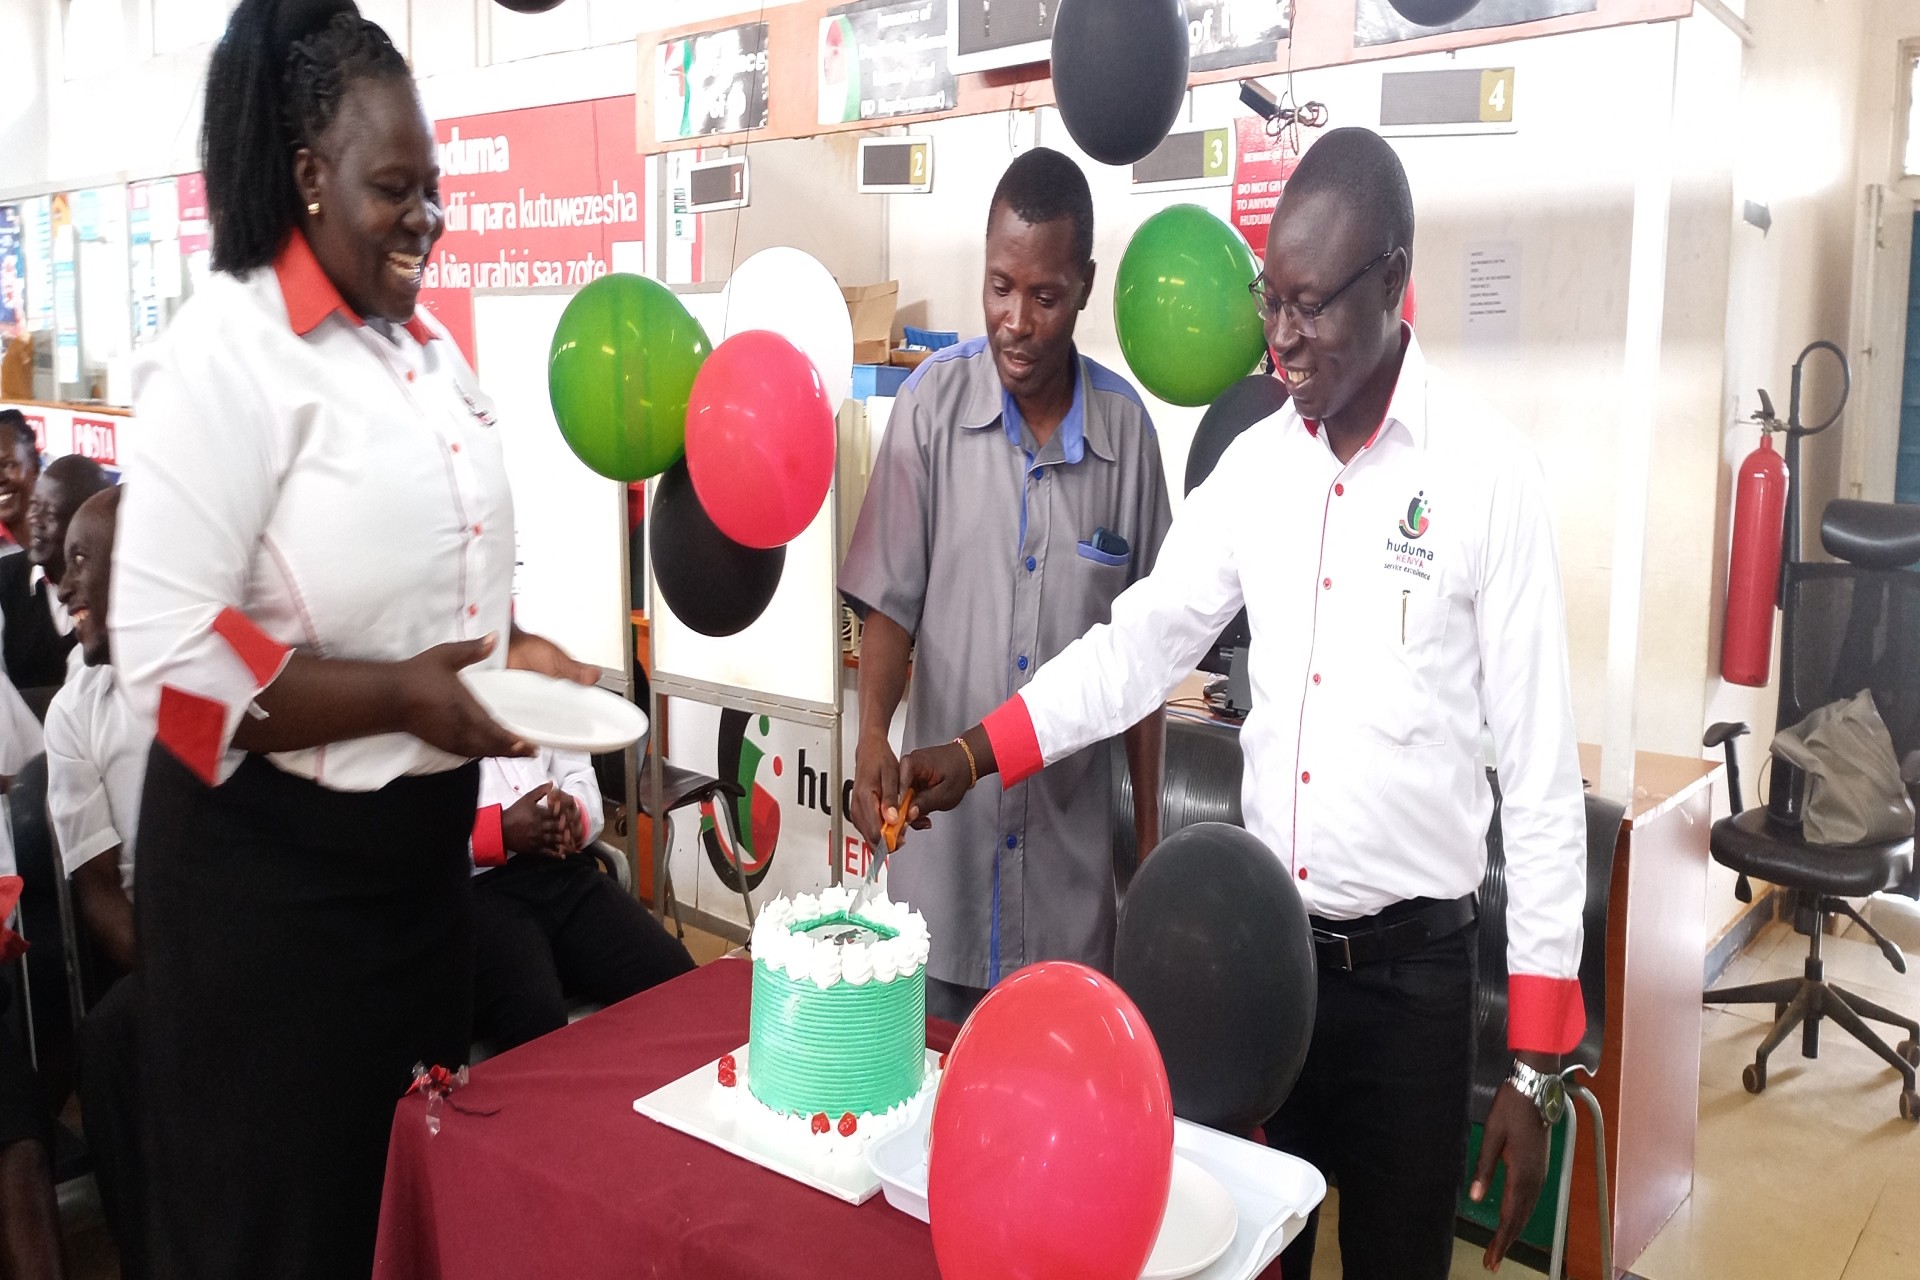 Locals call for the creation of more Huduma Centers